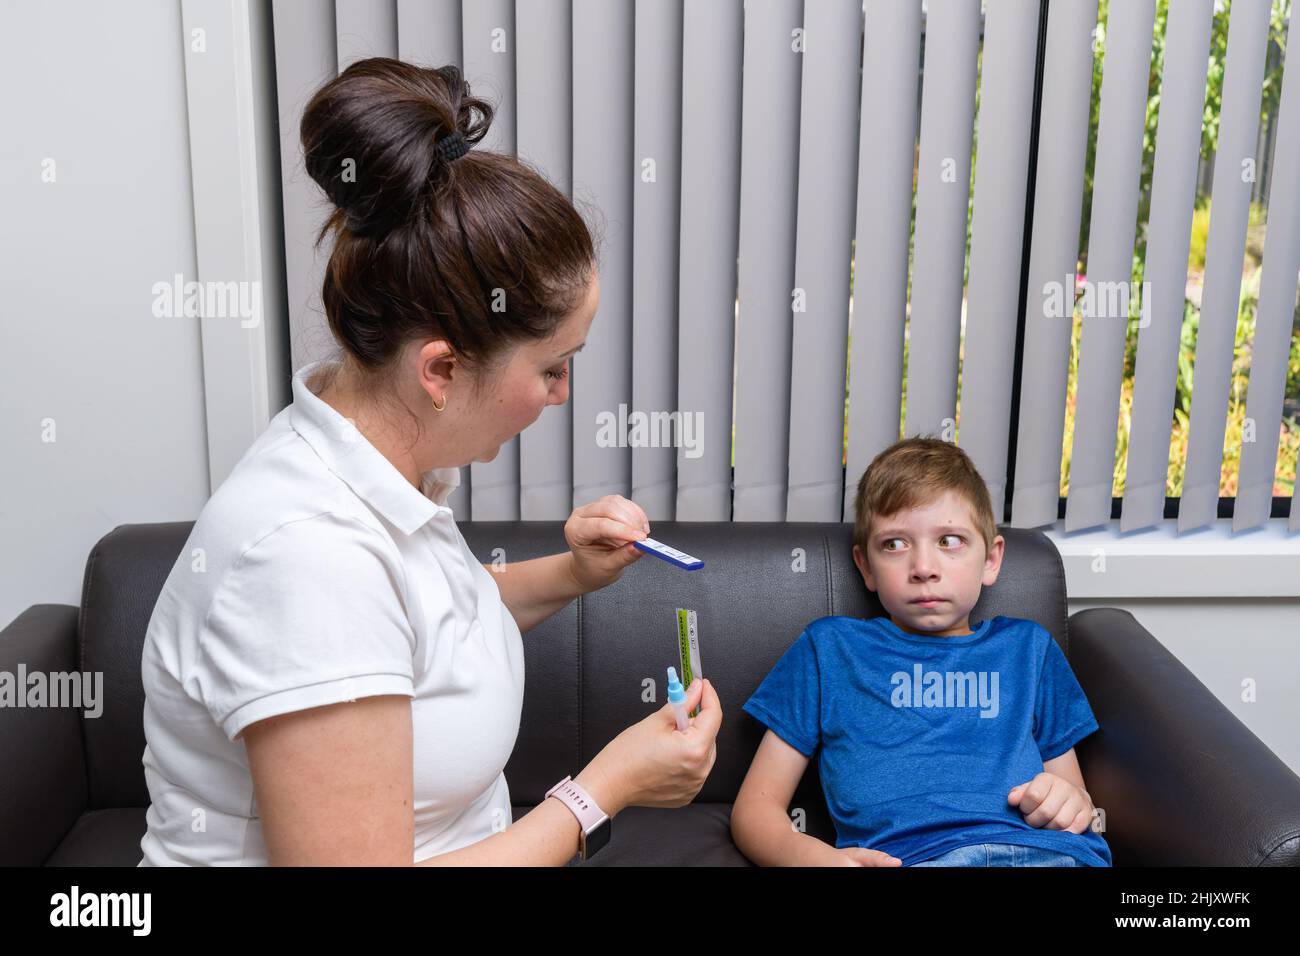 Mother going to do the COVID-19 rapid antigen test for her son at home Stock Photo